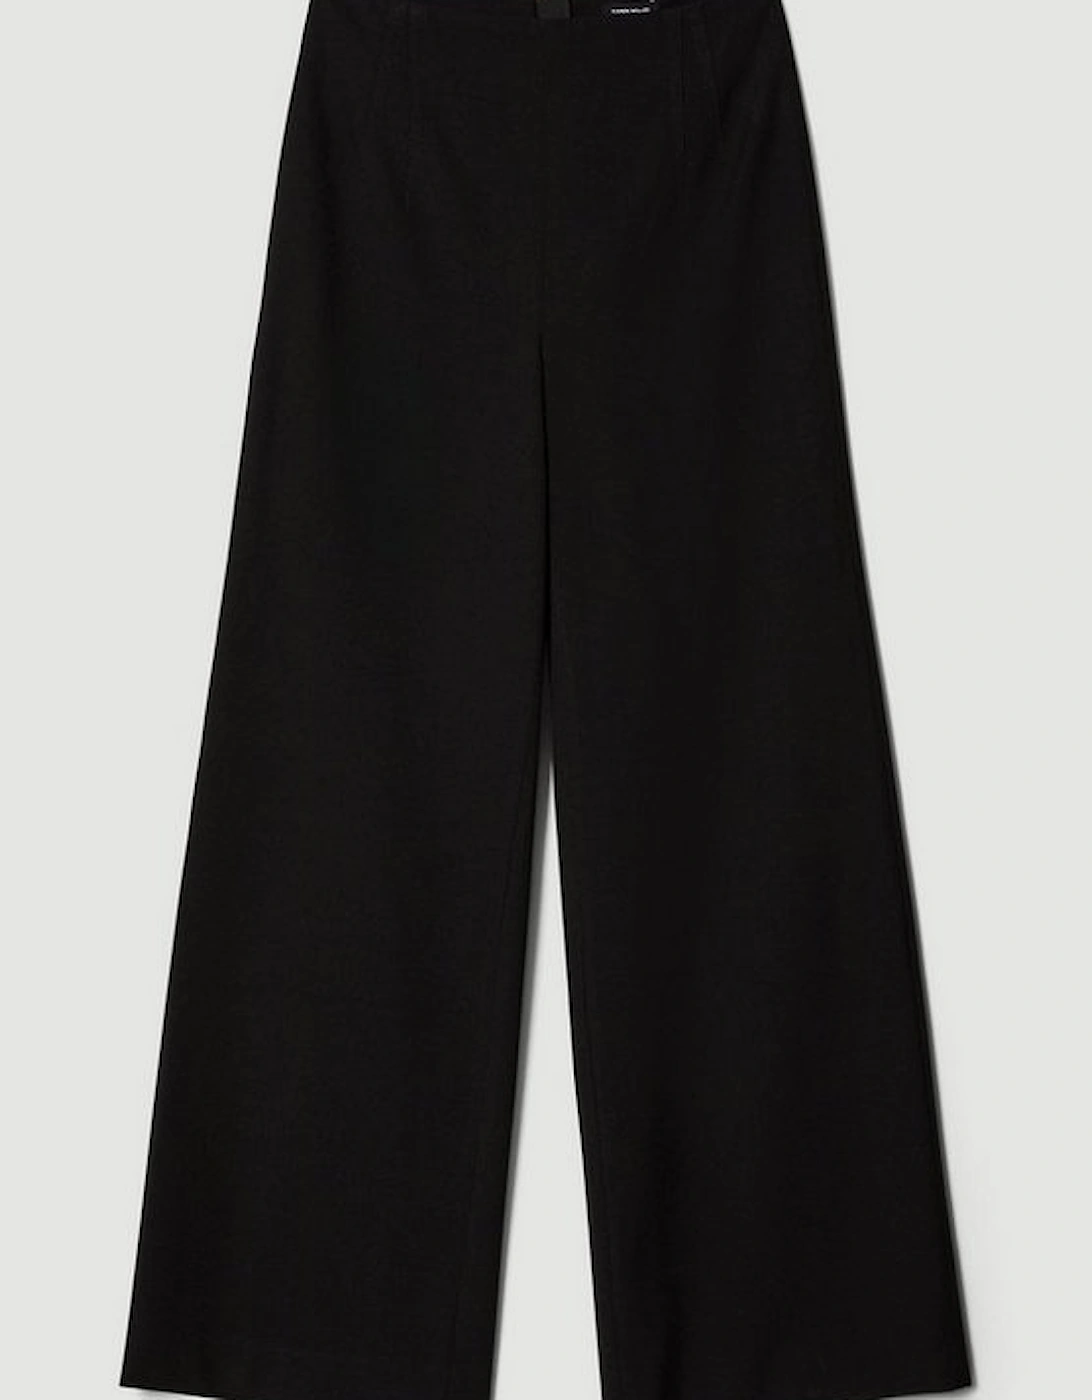 Structured Crepe Tailored High Waist Wide Leg Trousers